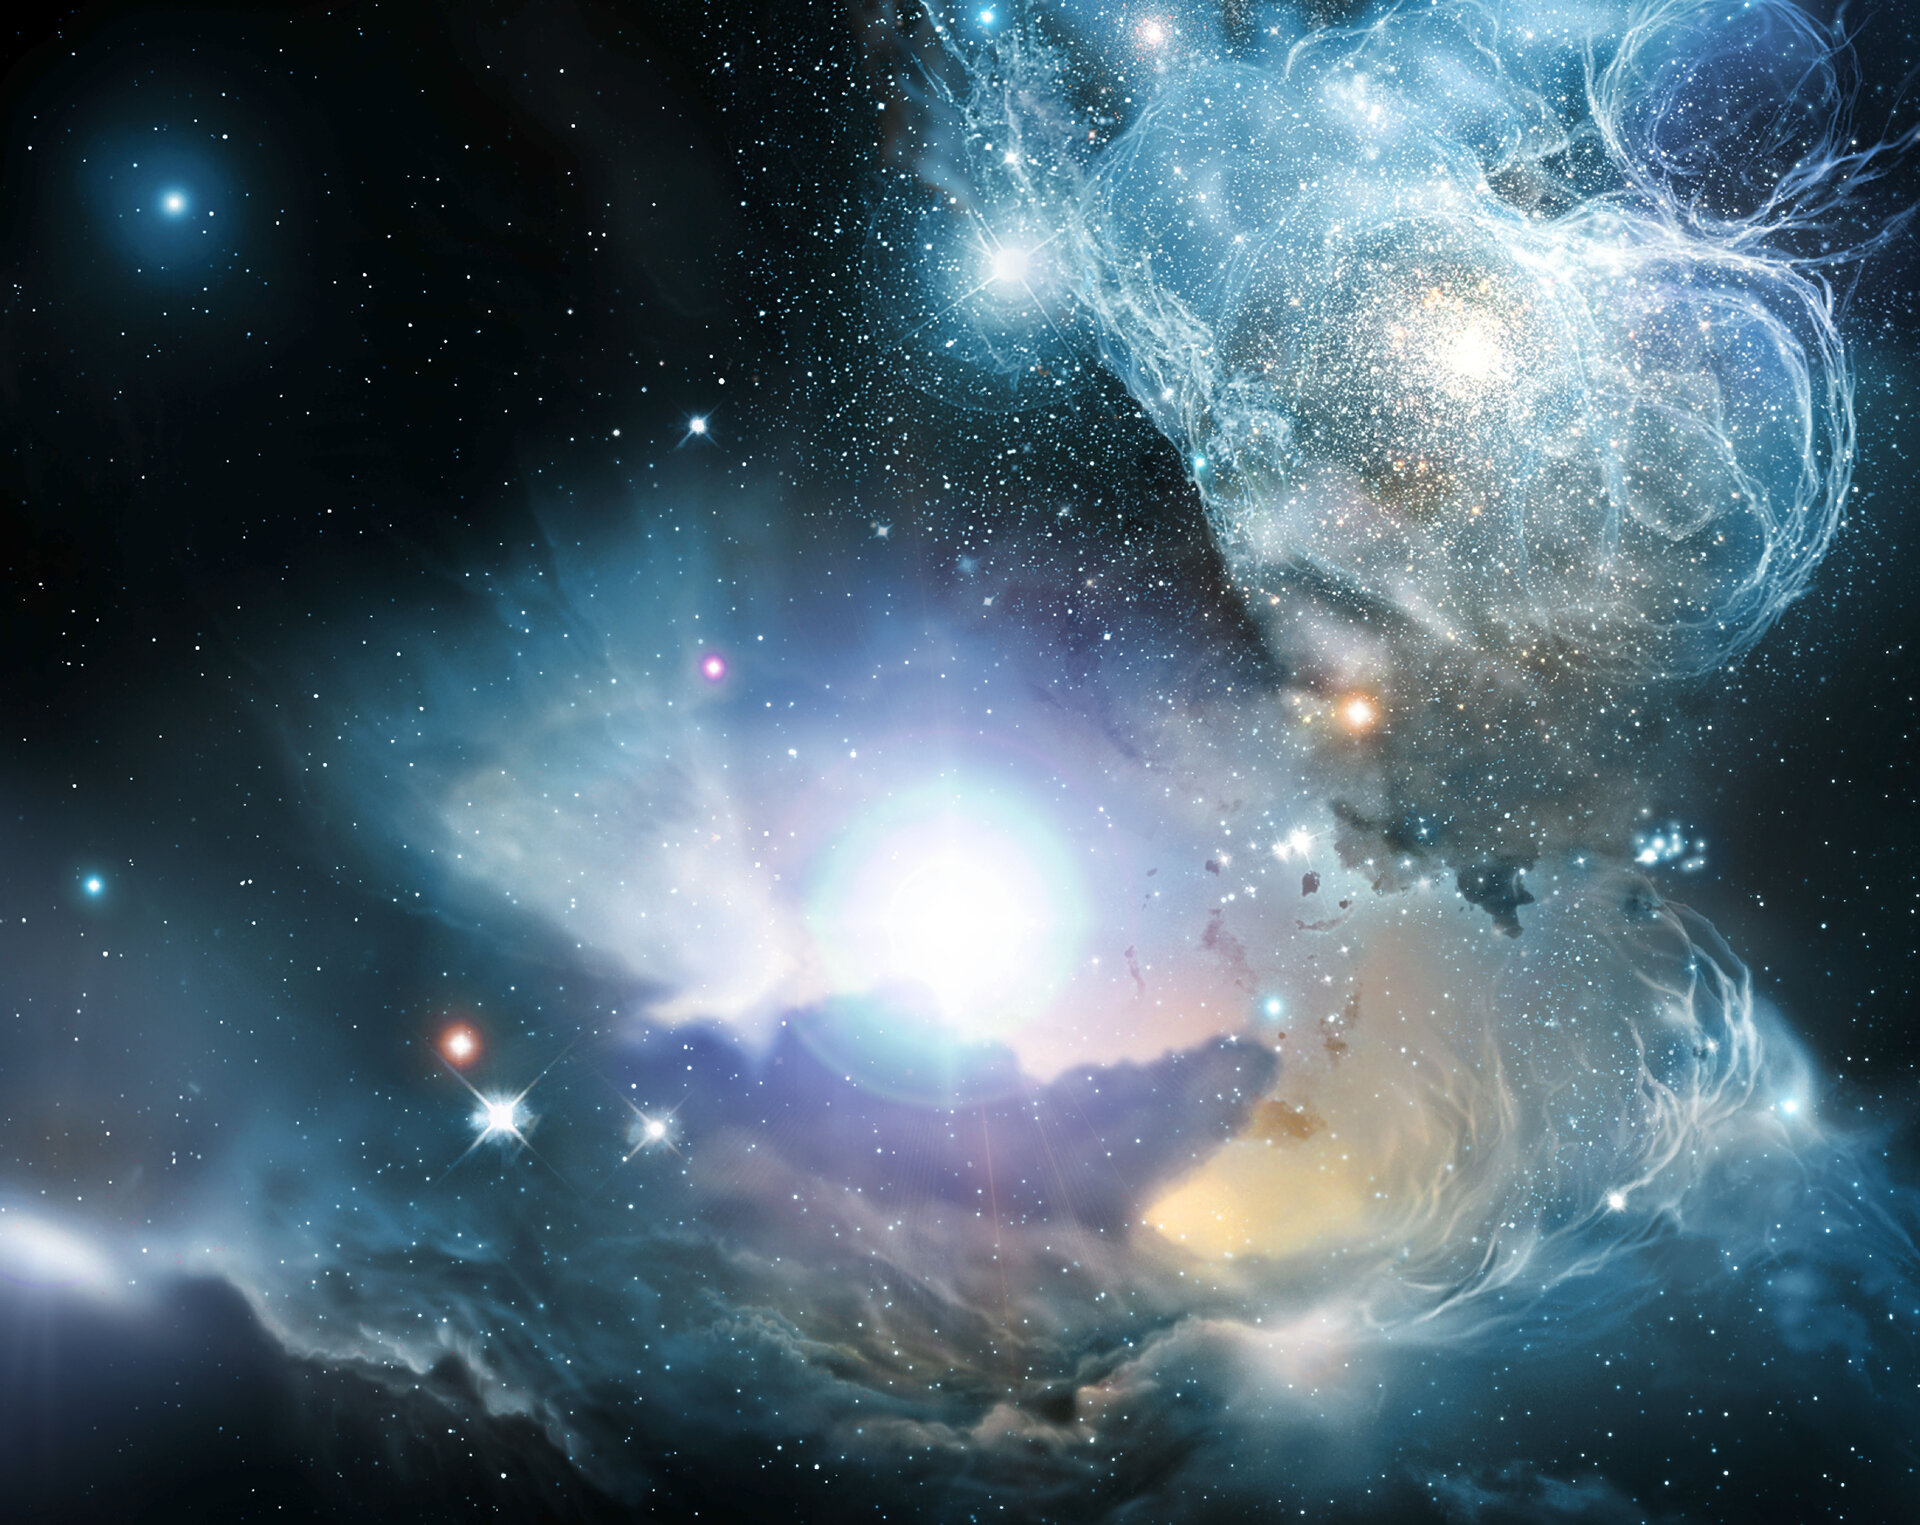 Artist impression of a quasar located in a primeval galaxy, around 900 million years after the Big Bang